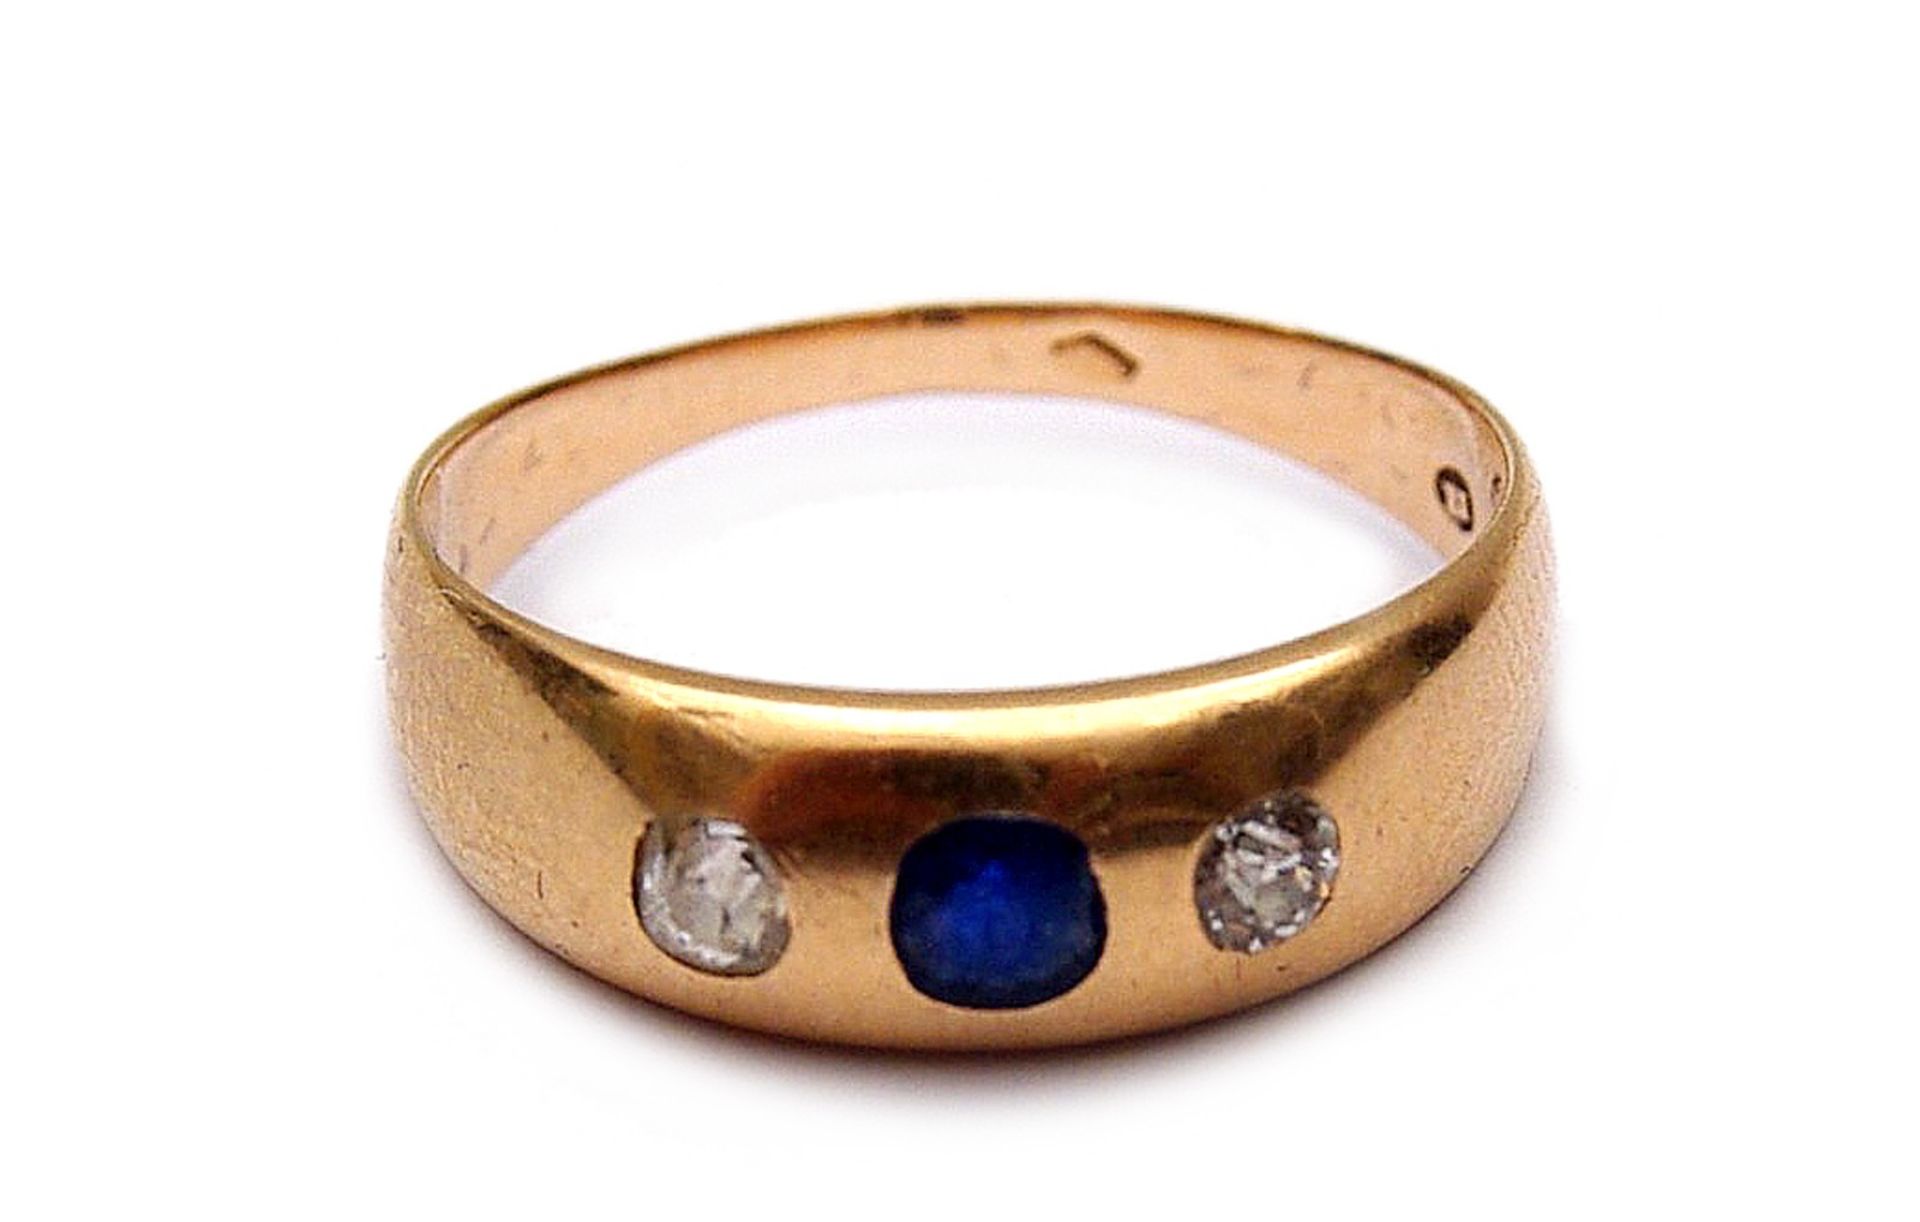 A blue sapphire and diamond ring